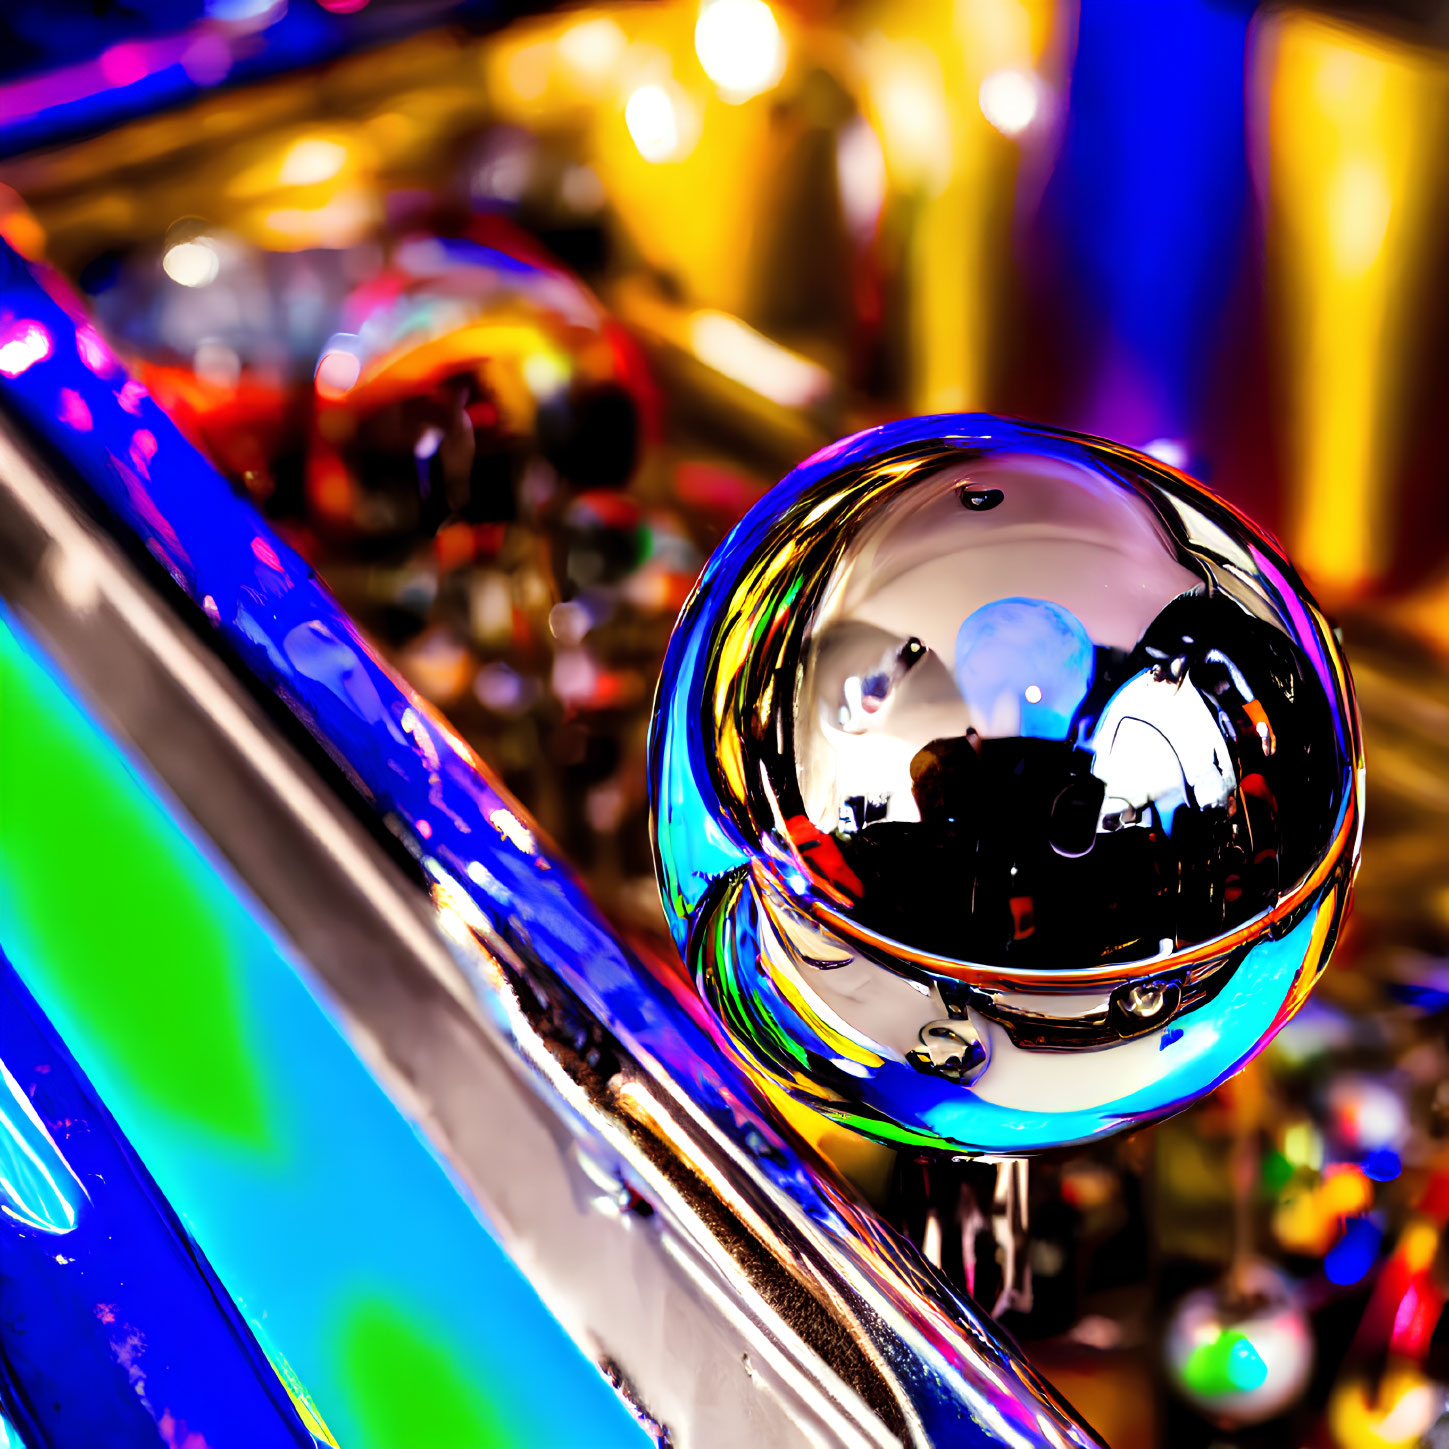 Colorful Pinball Machine with Shiny Silver Ball and Arcade Lights